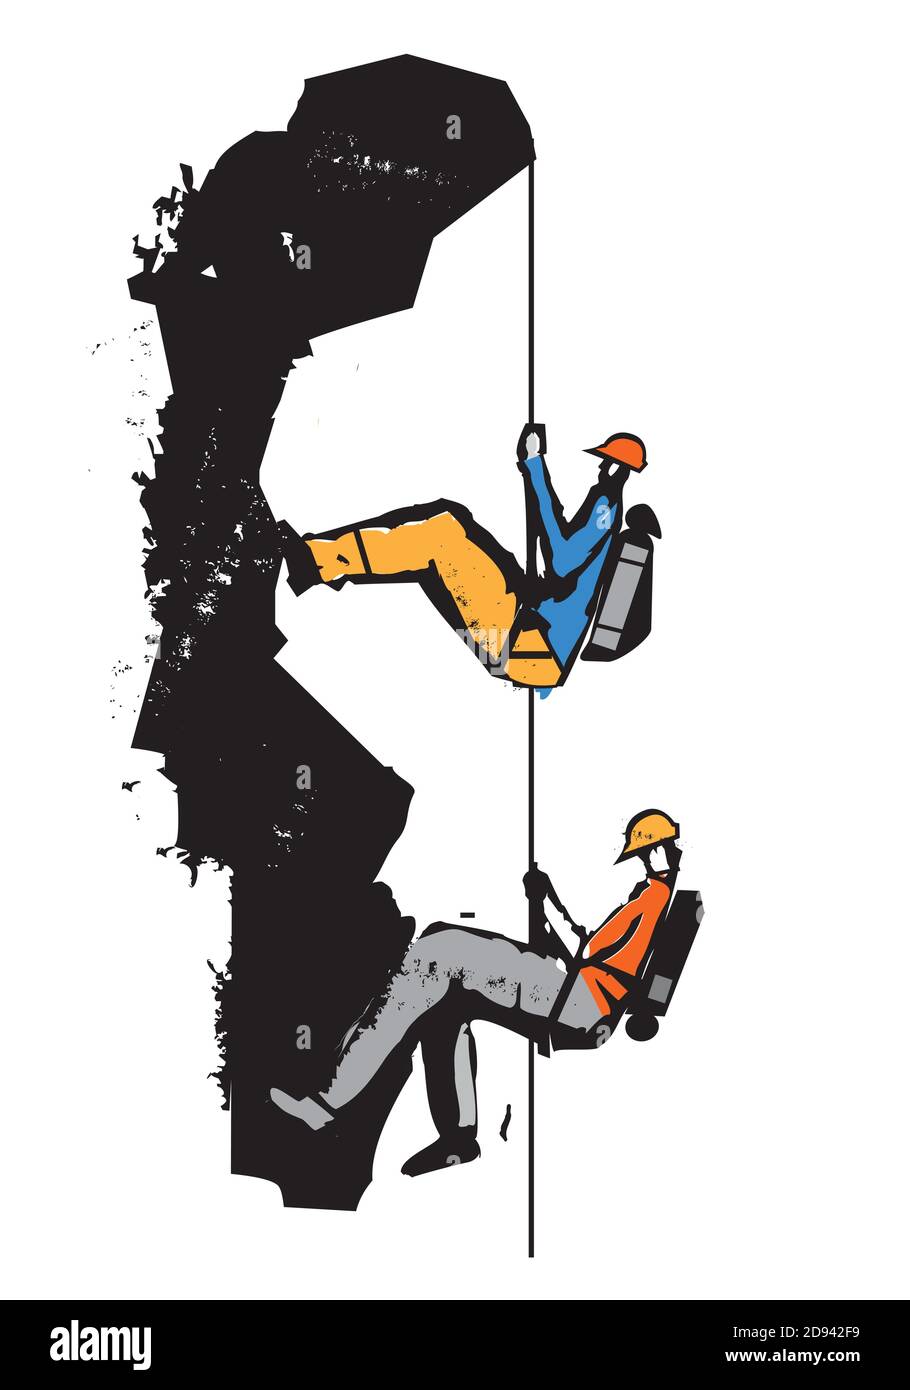 Two climbers on a rope, cartoon. Illustration of climbers in the rocks. Grunge Stylized Illustration imitating linocut. Vector available. Stock Vector